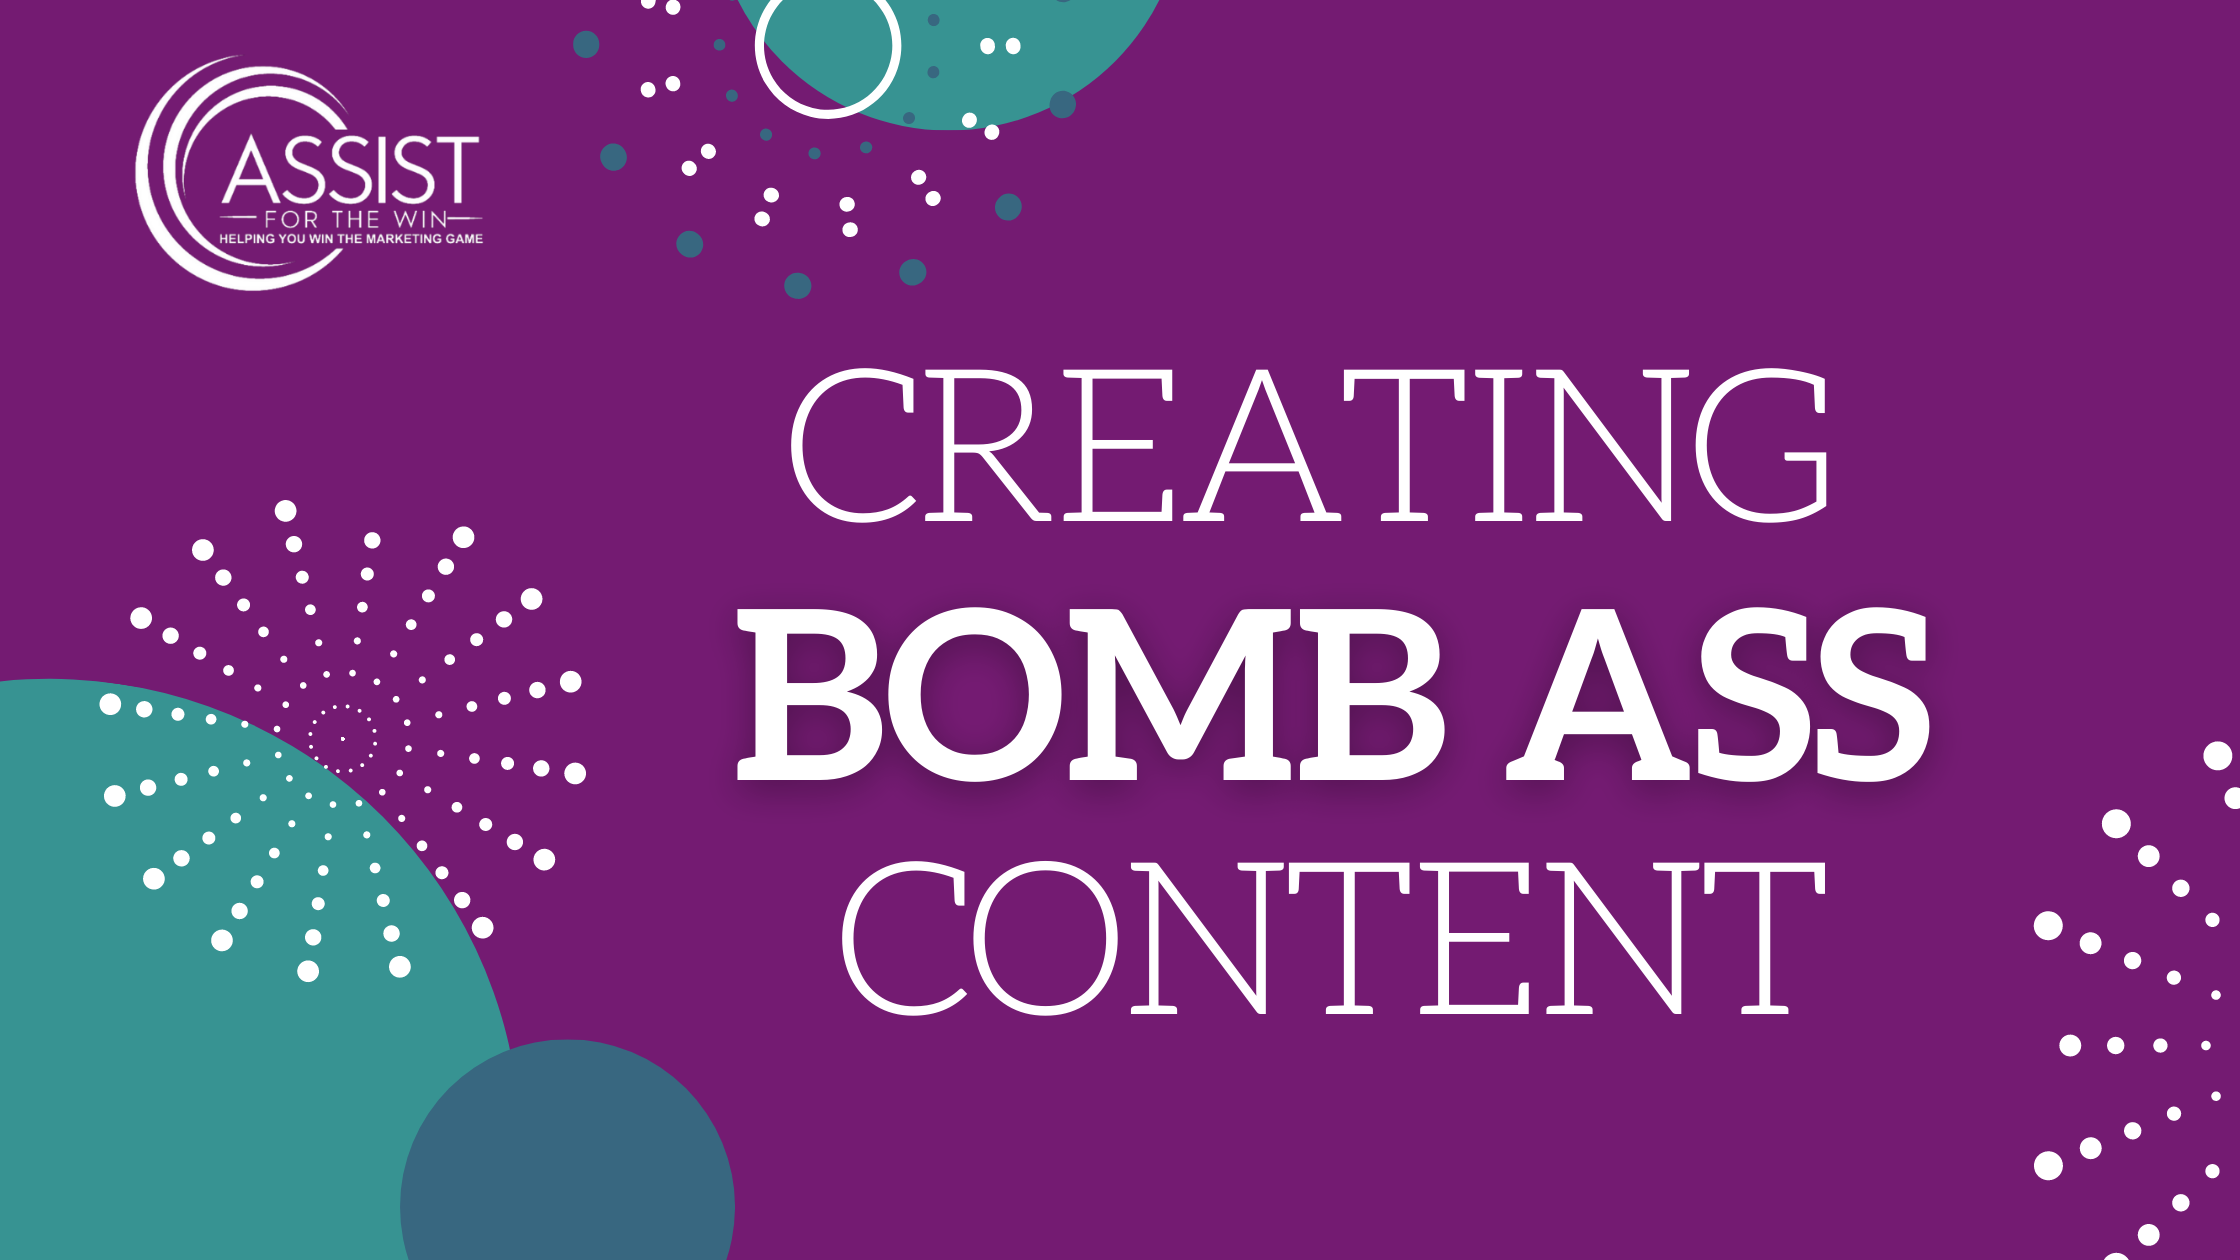 Are You Creating Bomb Ass Content?